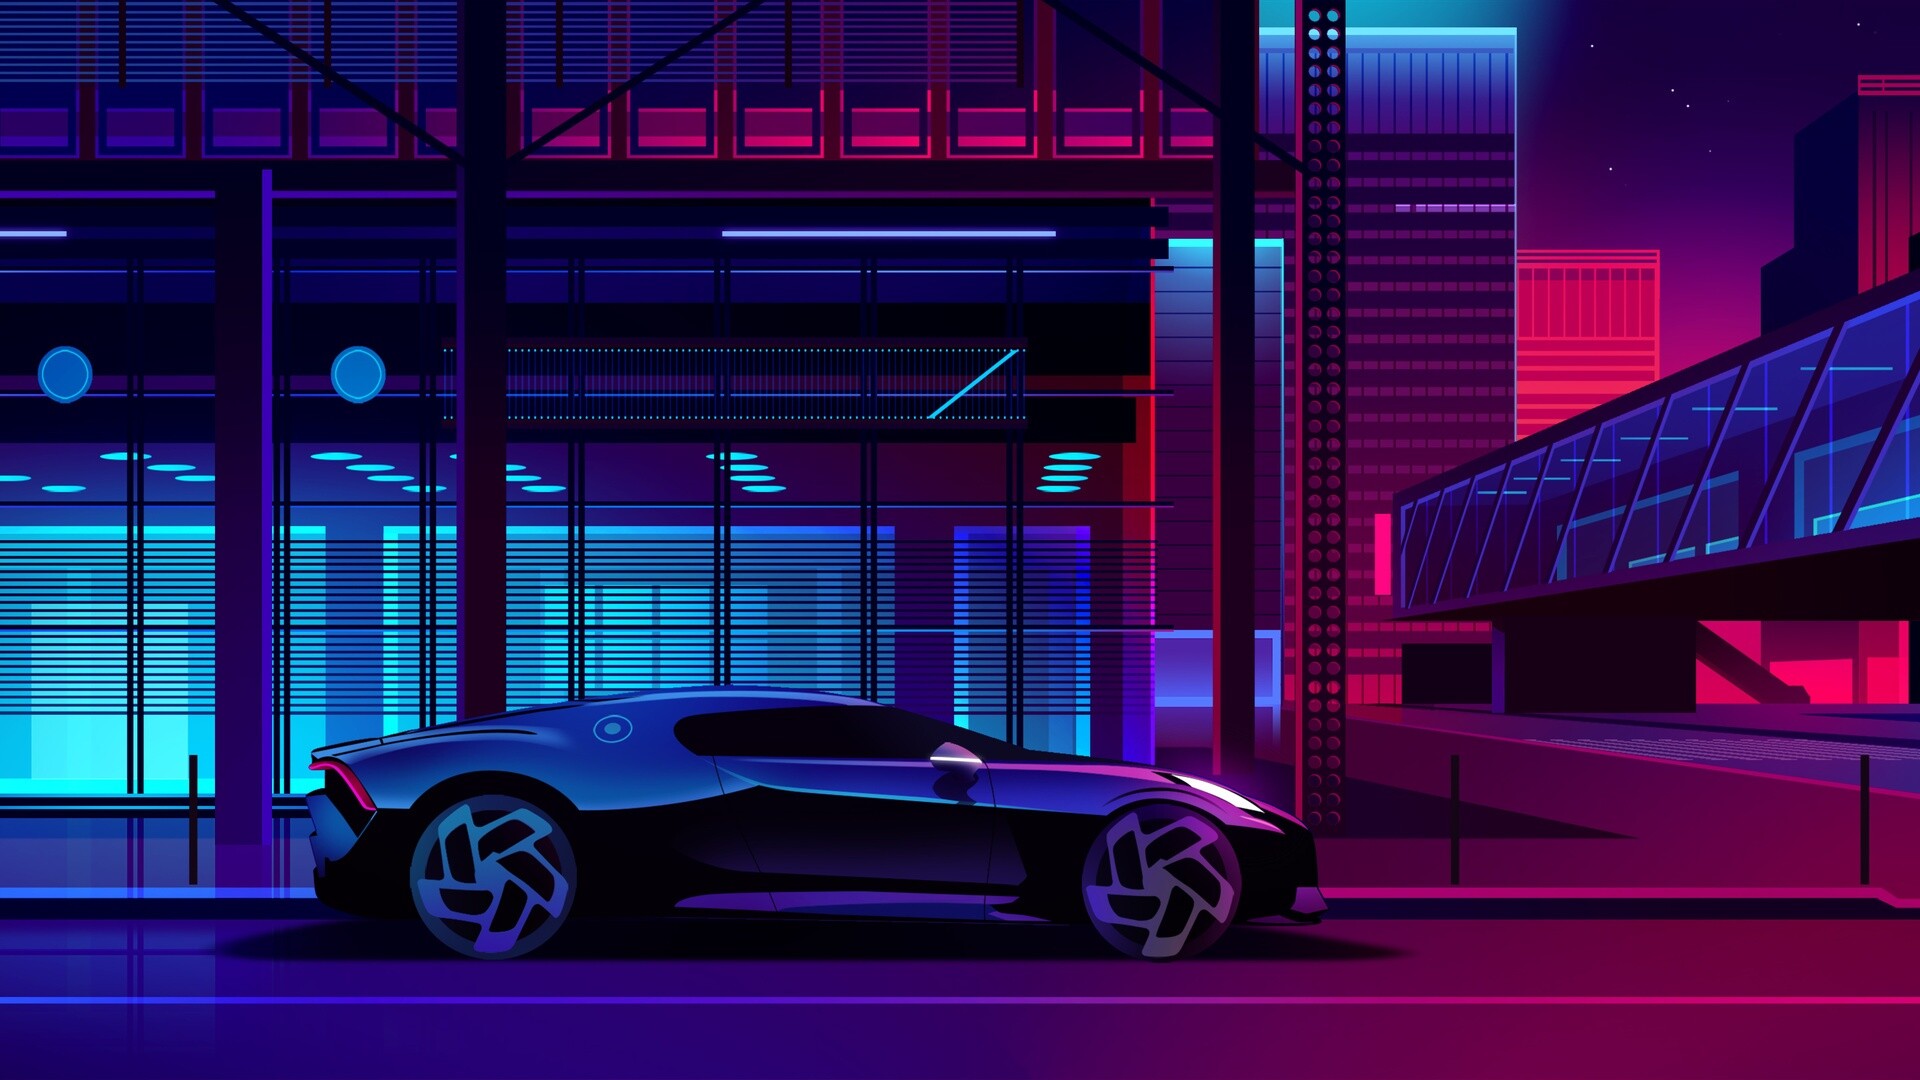 Neon: Used to create unique and memorable visuals. 1920x1080 Full HD Wallpaper.